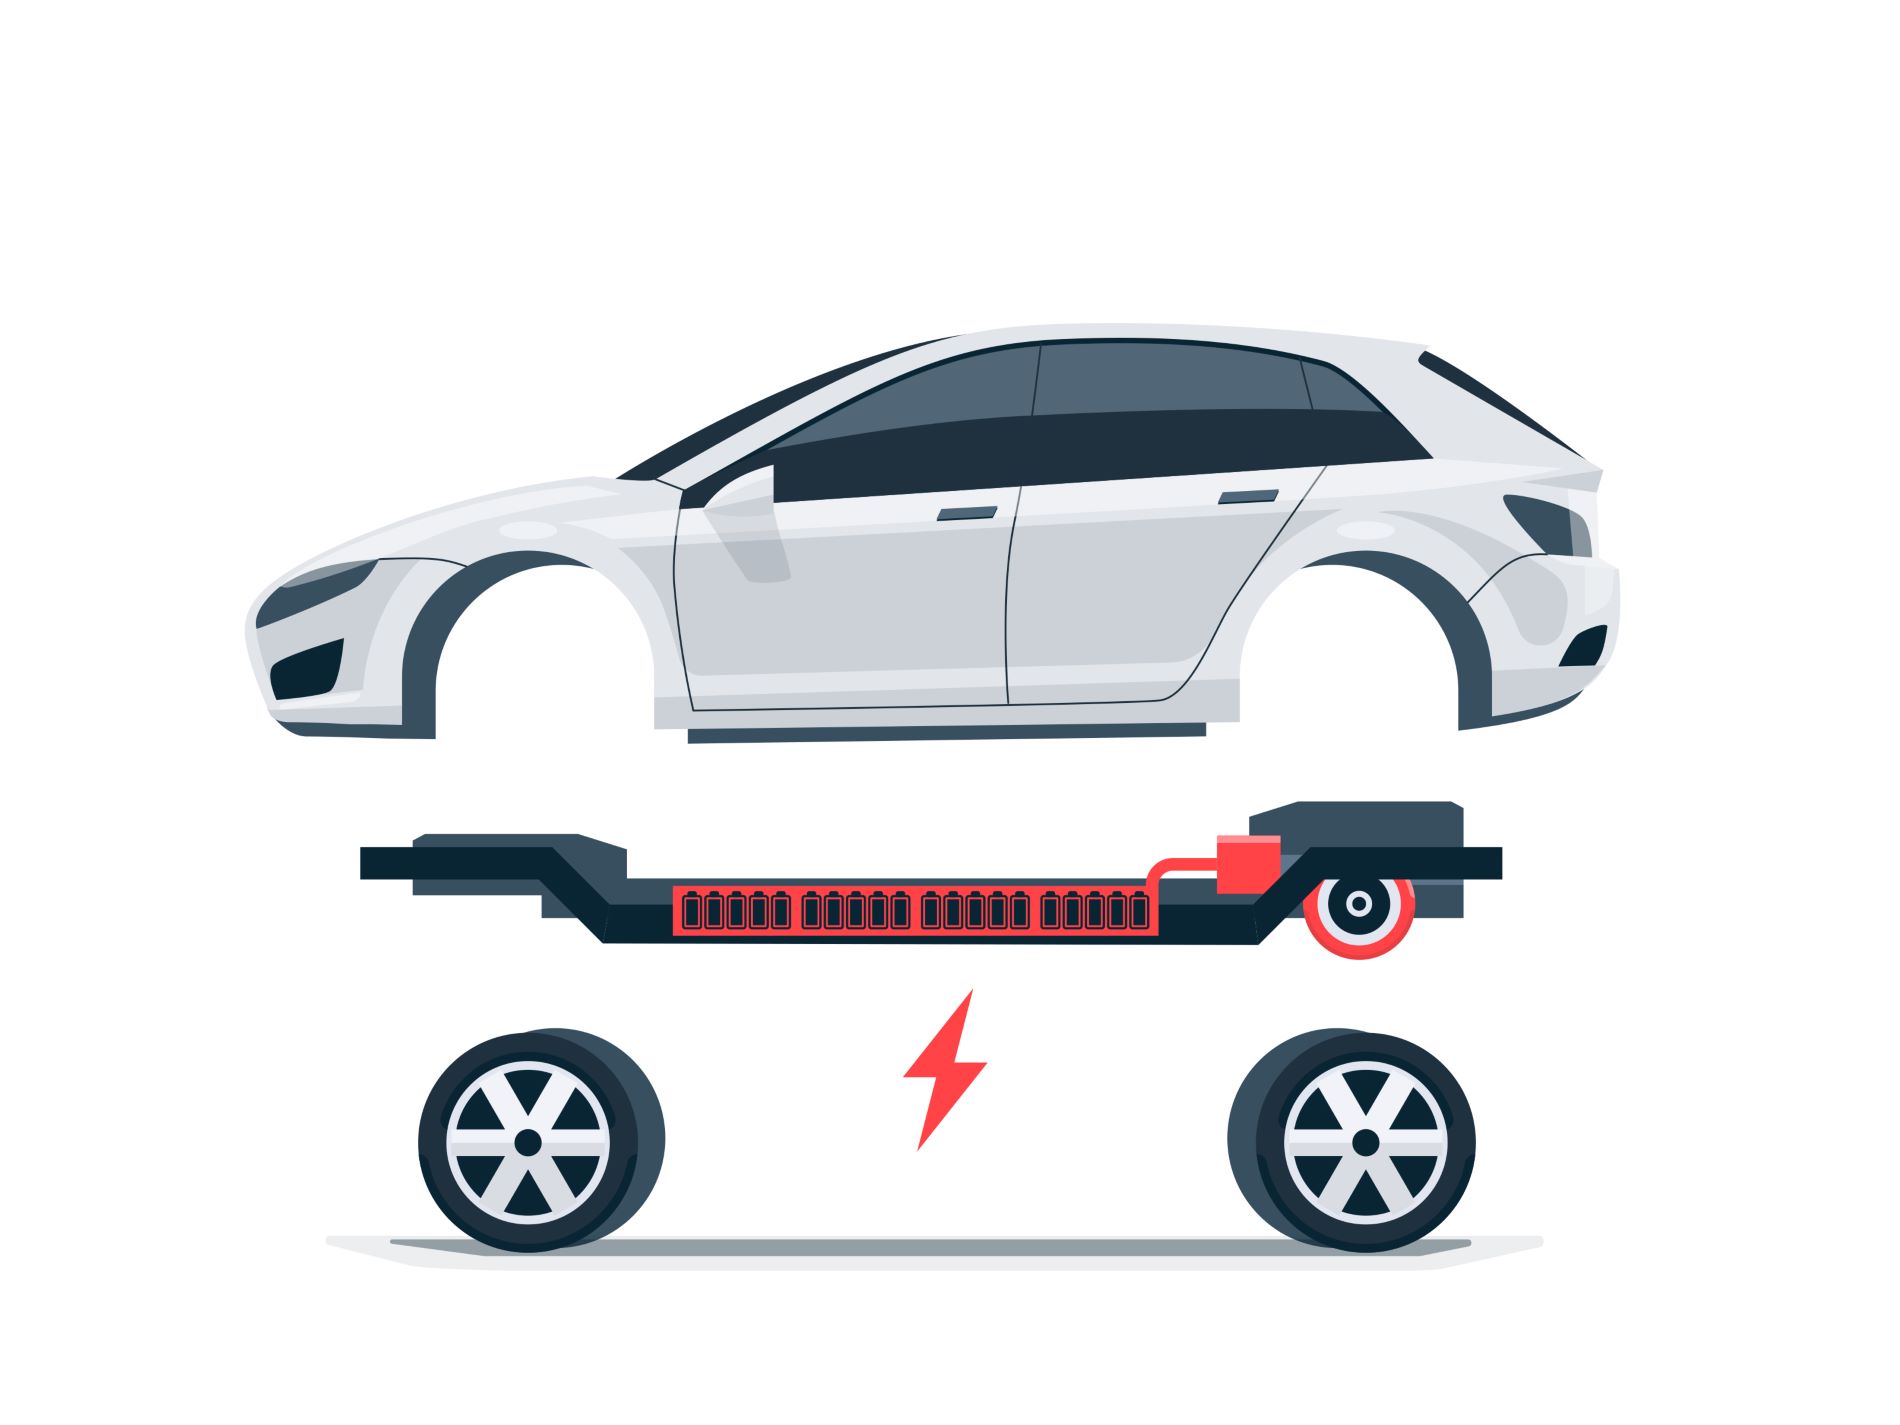 How Do Electric Cars Work? A breakdown of Electric vehicle components.